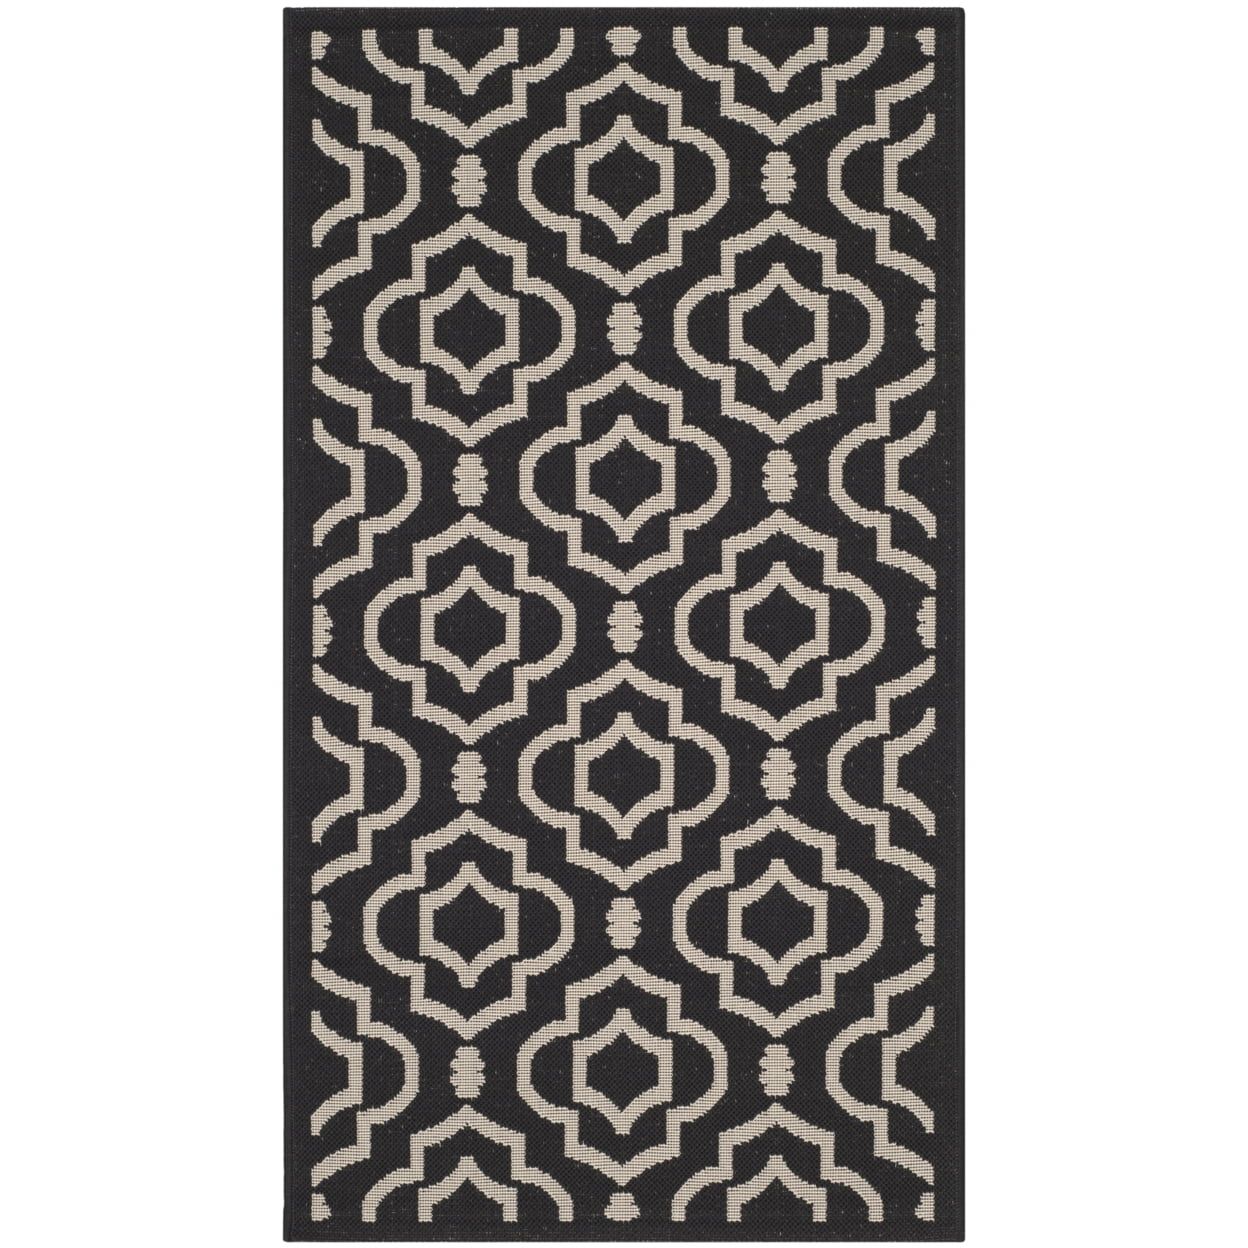 Rectangular Easy-Care Black/Beige Synthetic 5' x 7' Area Rug